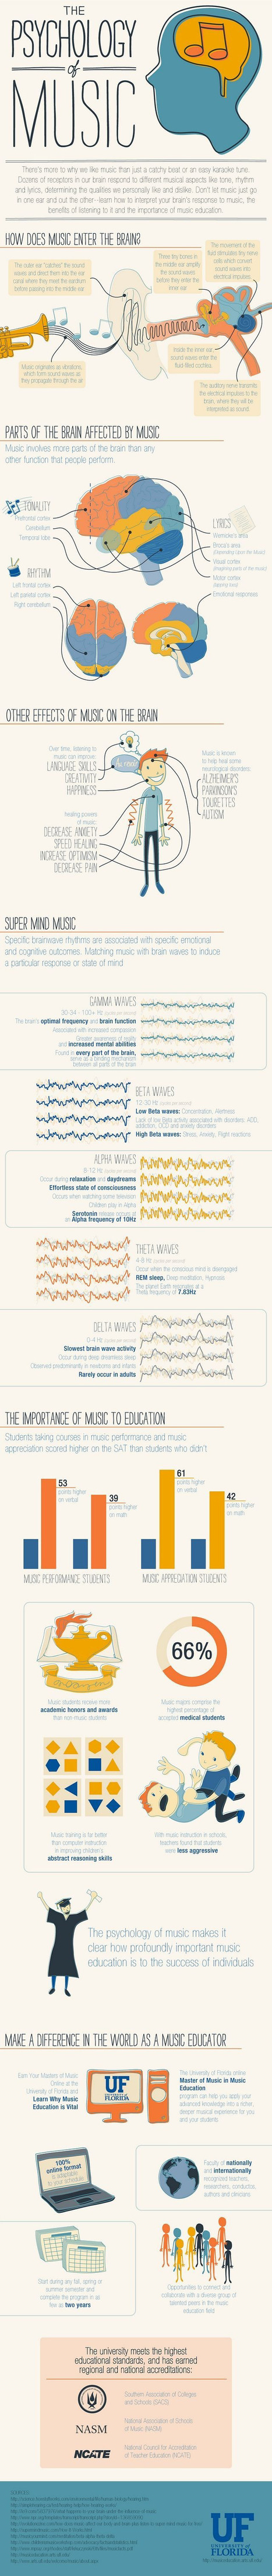 A Wonderful Graphic Featuring The Importance of Music in Education [Infographic] | 21st Century Learning and Teaching | Scoop.it